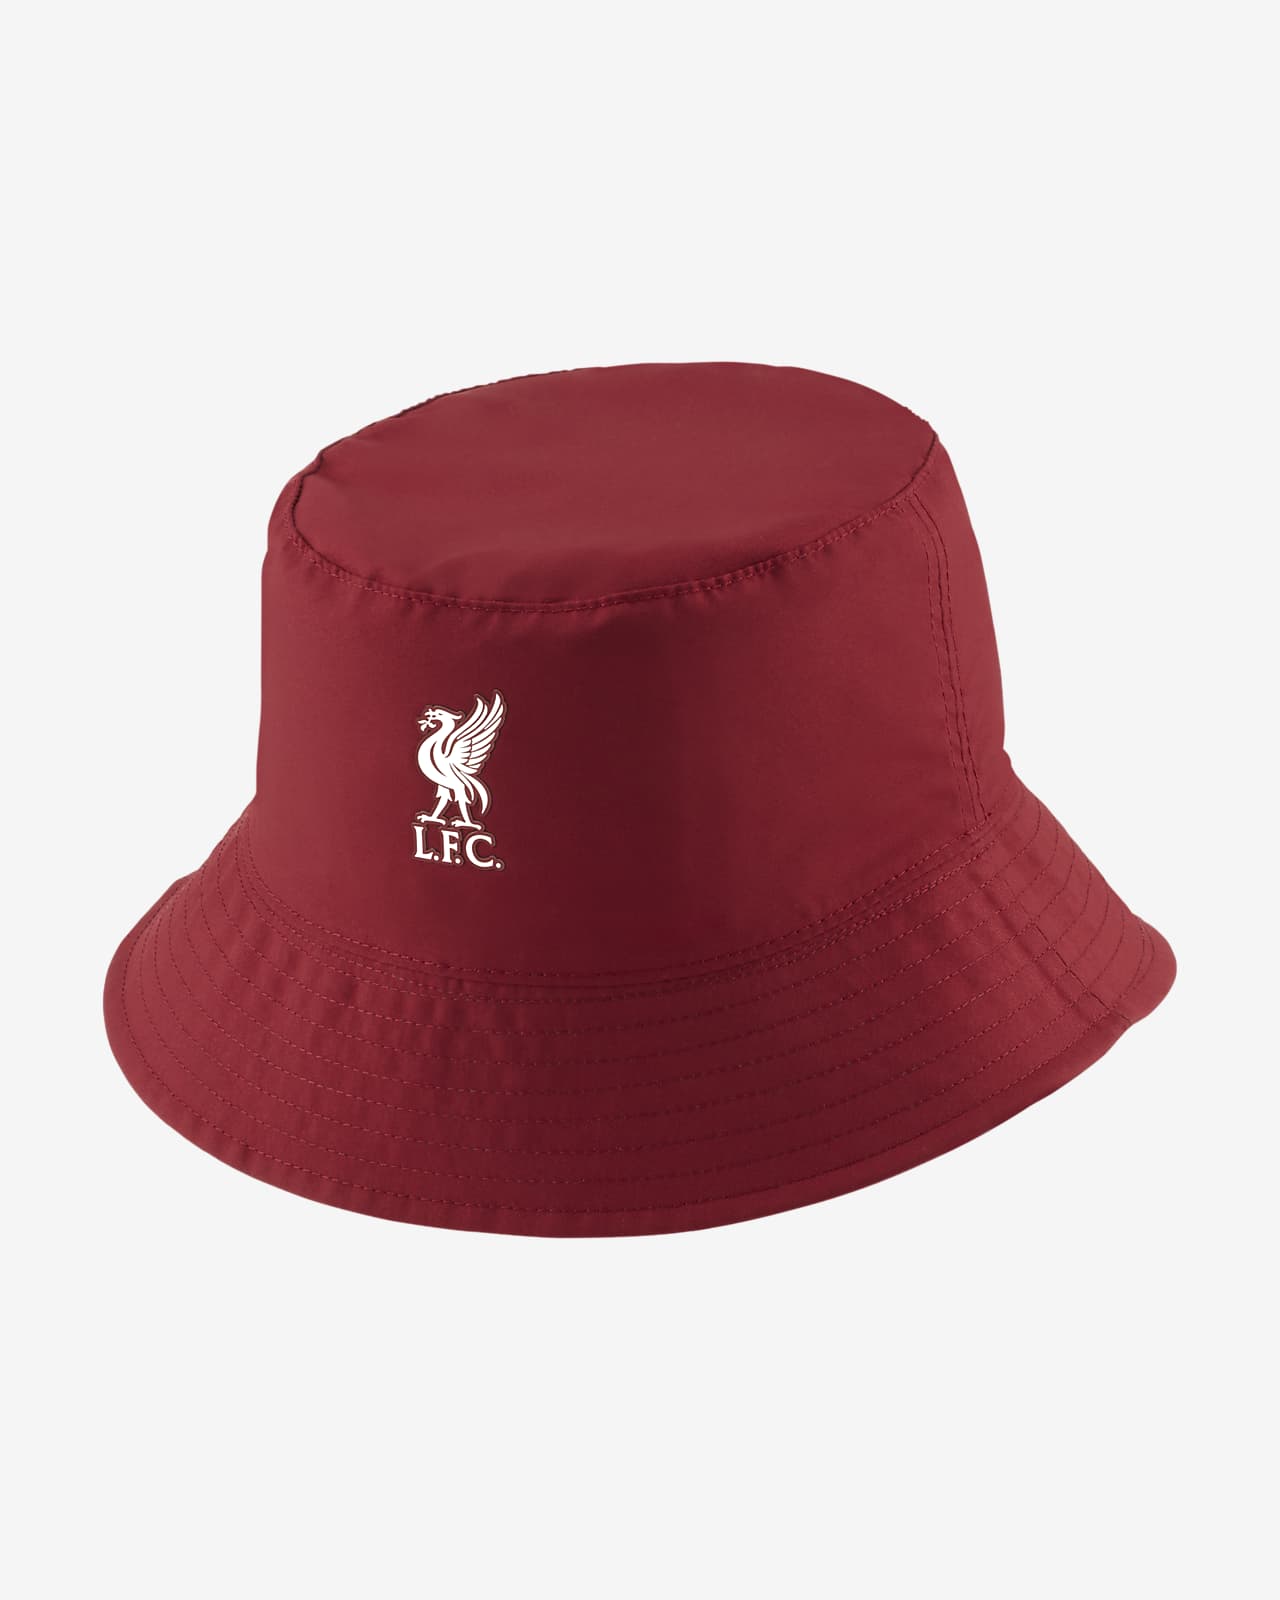 Cur persona Proeminent liverpool official reversible sun bucket hat red ...